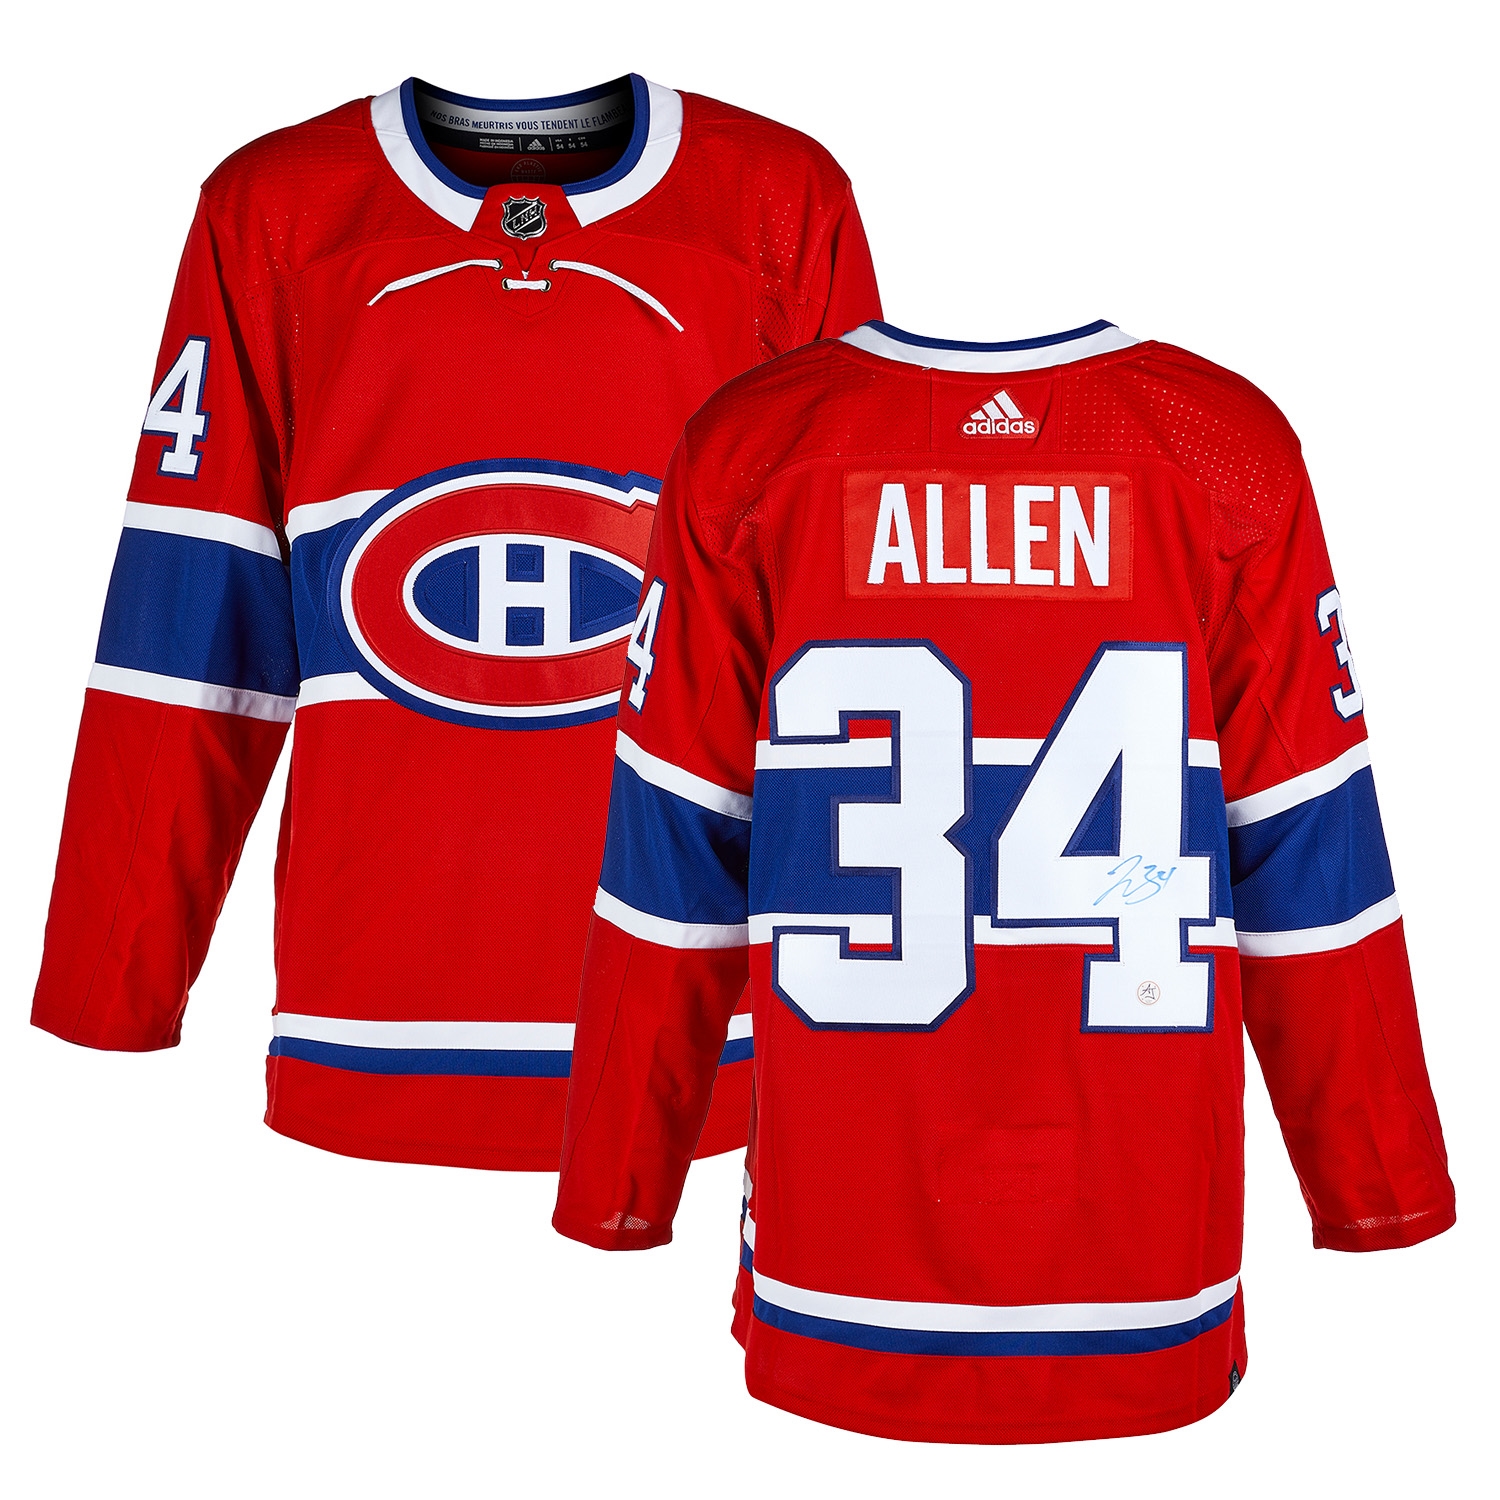 Jake Allen Autographed Montreal Canadiens adidas Jersey